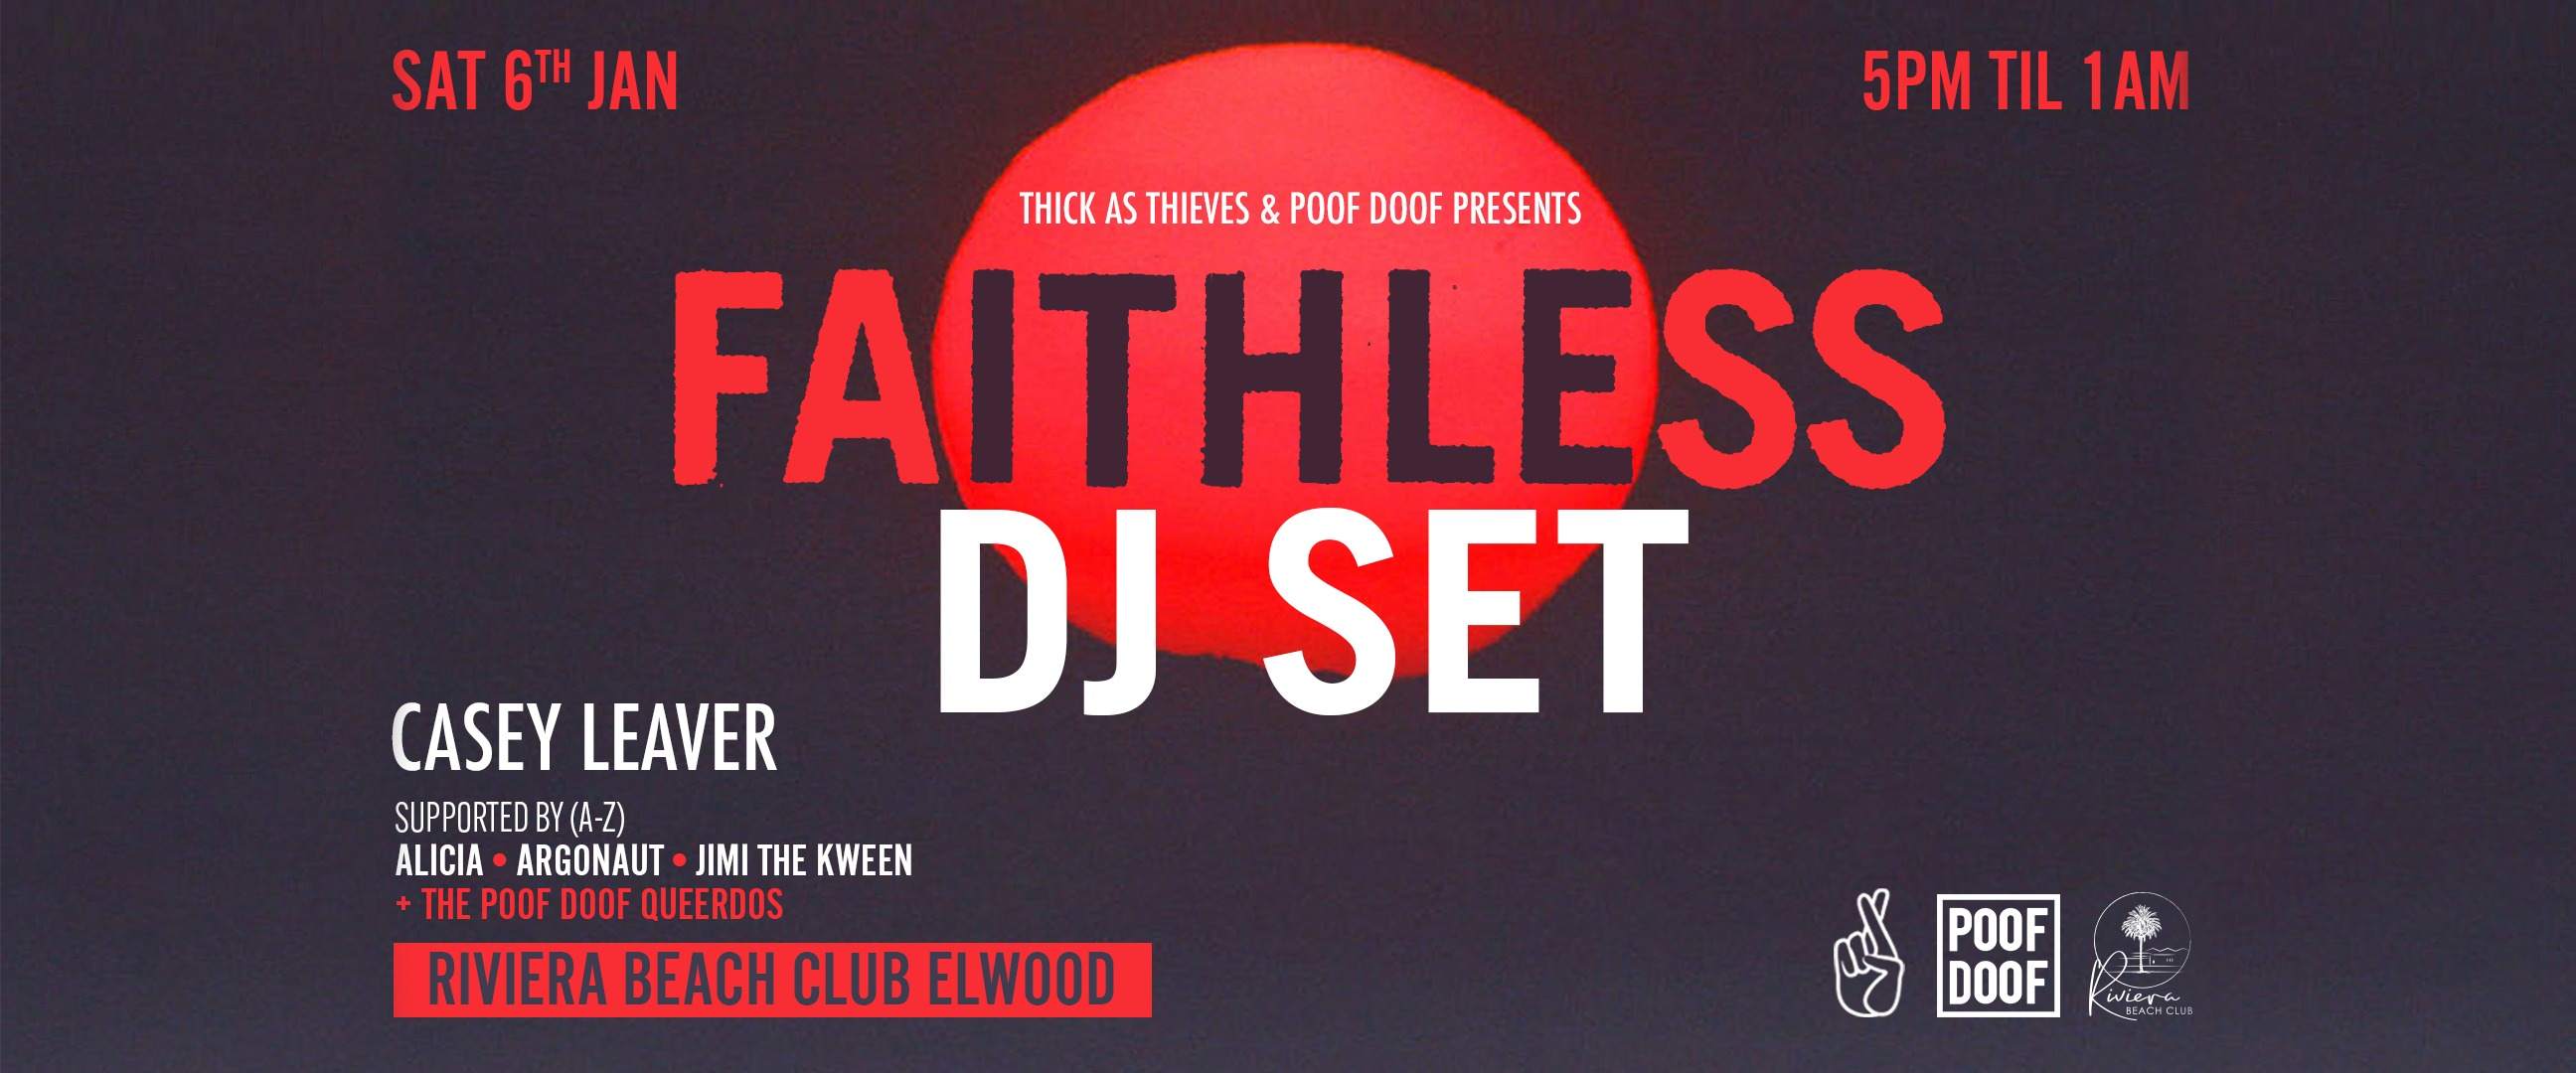 Faithless (DJ SET) presented by Thick As Thieves and POOF DOOF - Página frontal